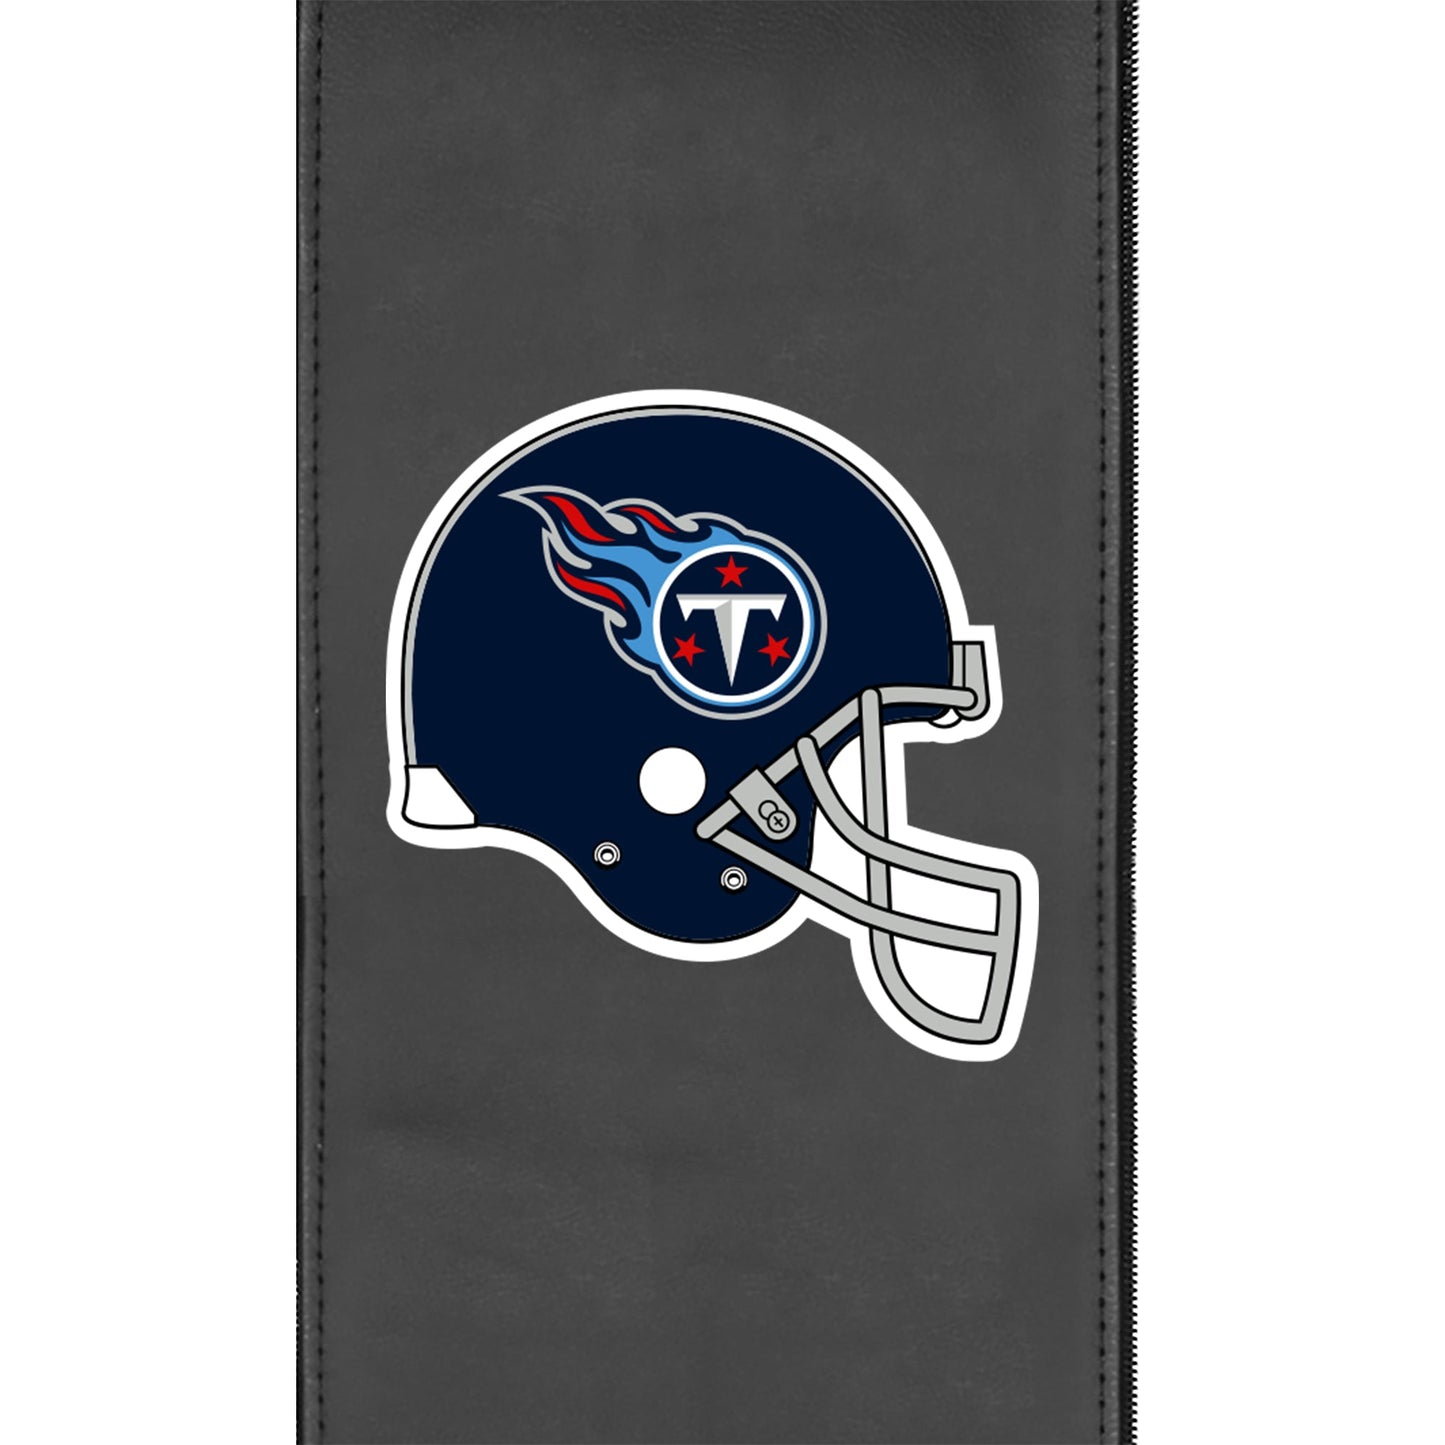 Stealth Power Plus Recliner with Tennessee Titans Helmet Logo